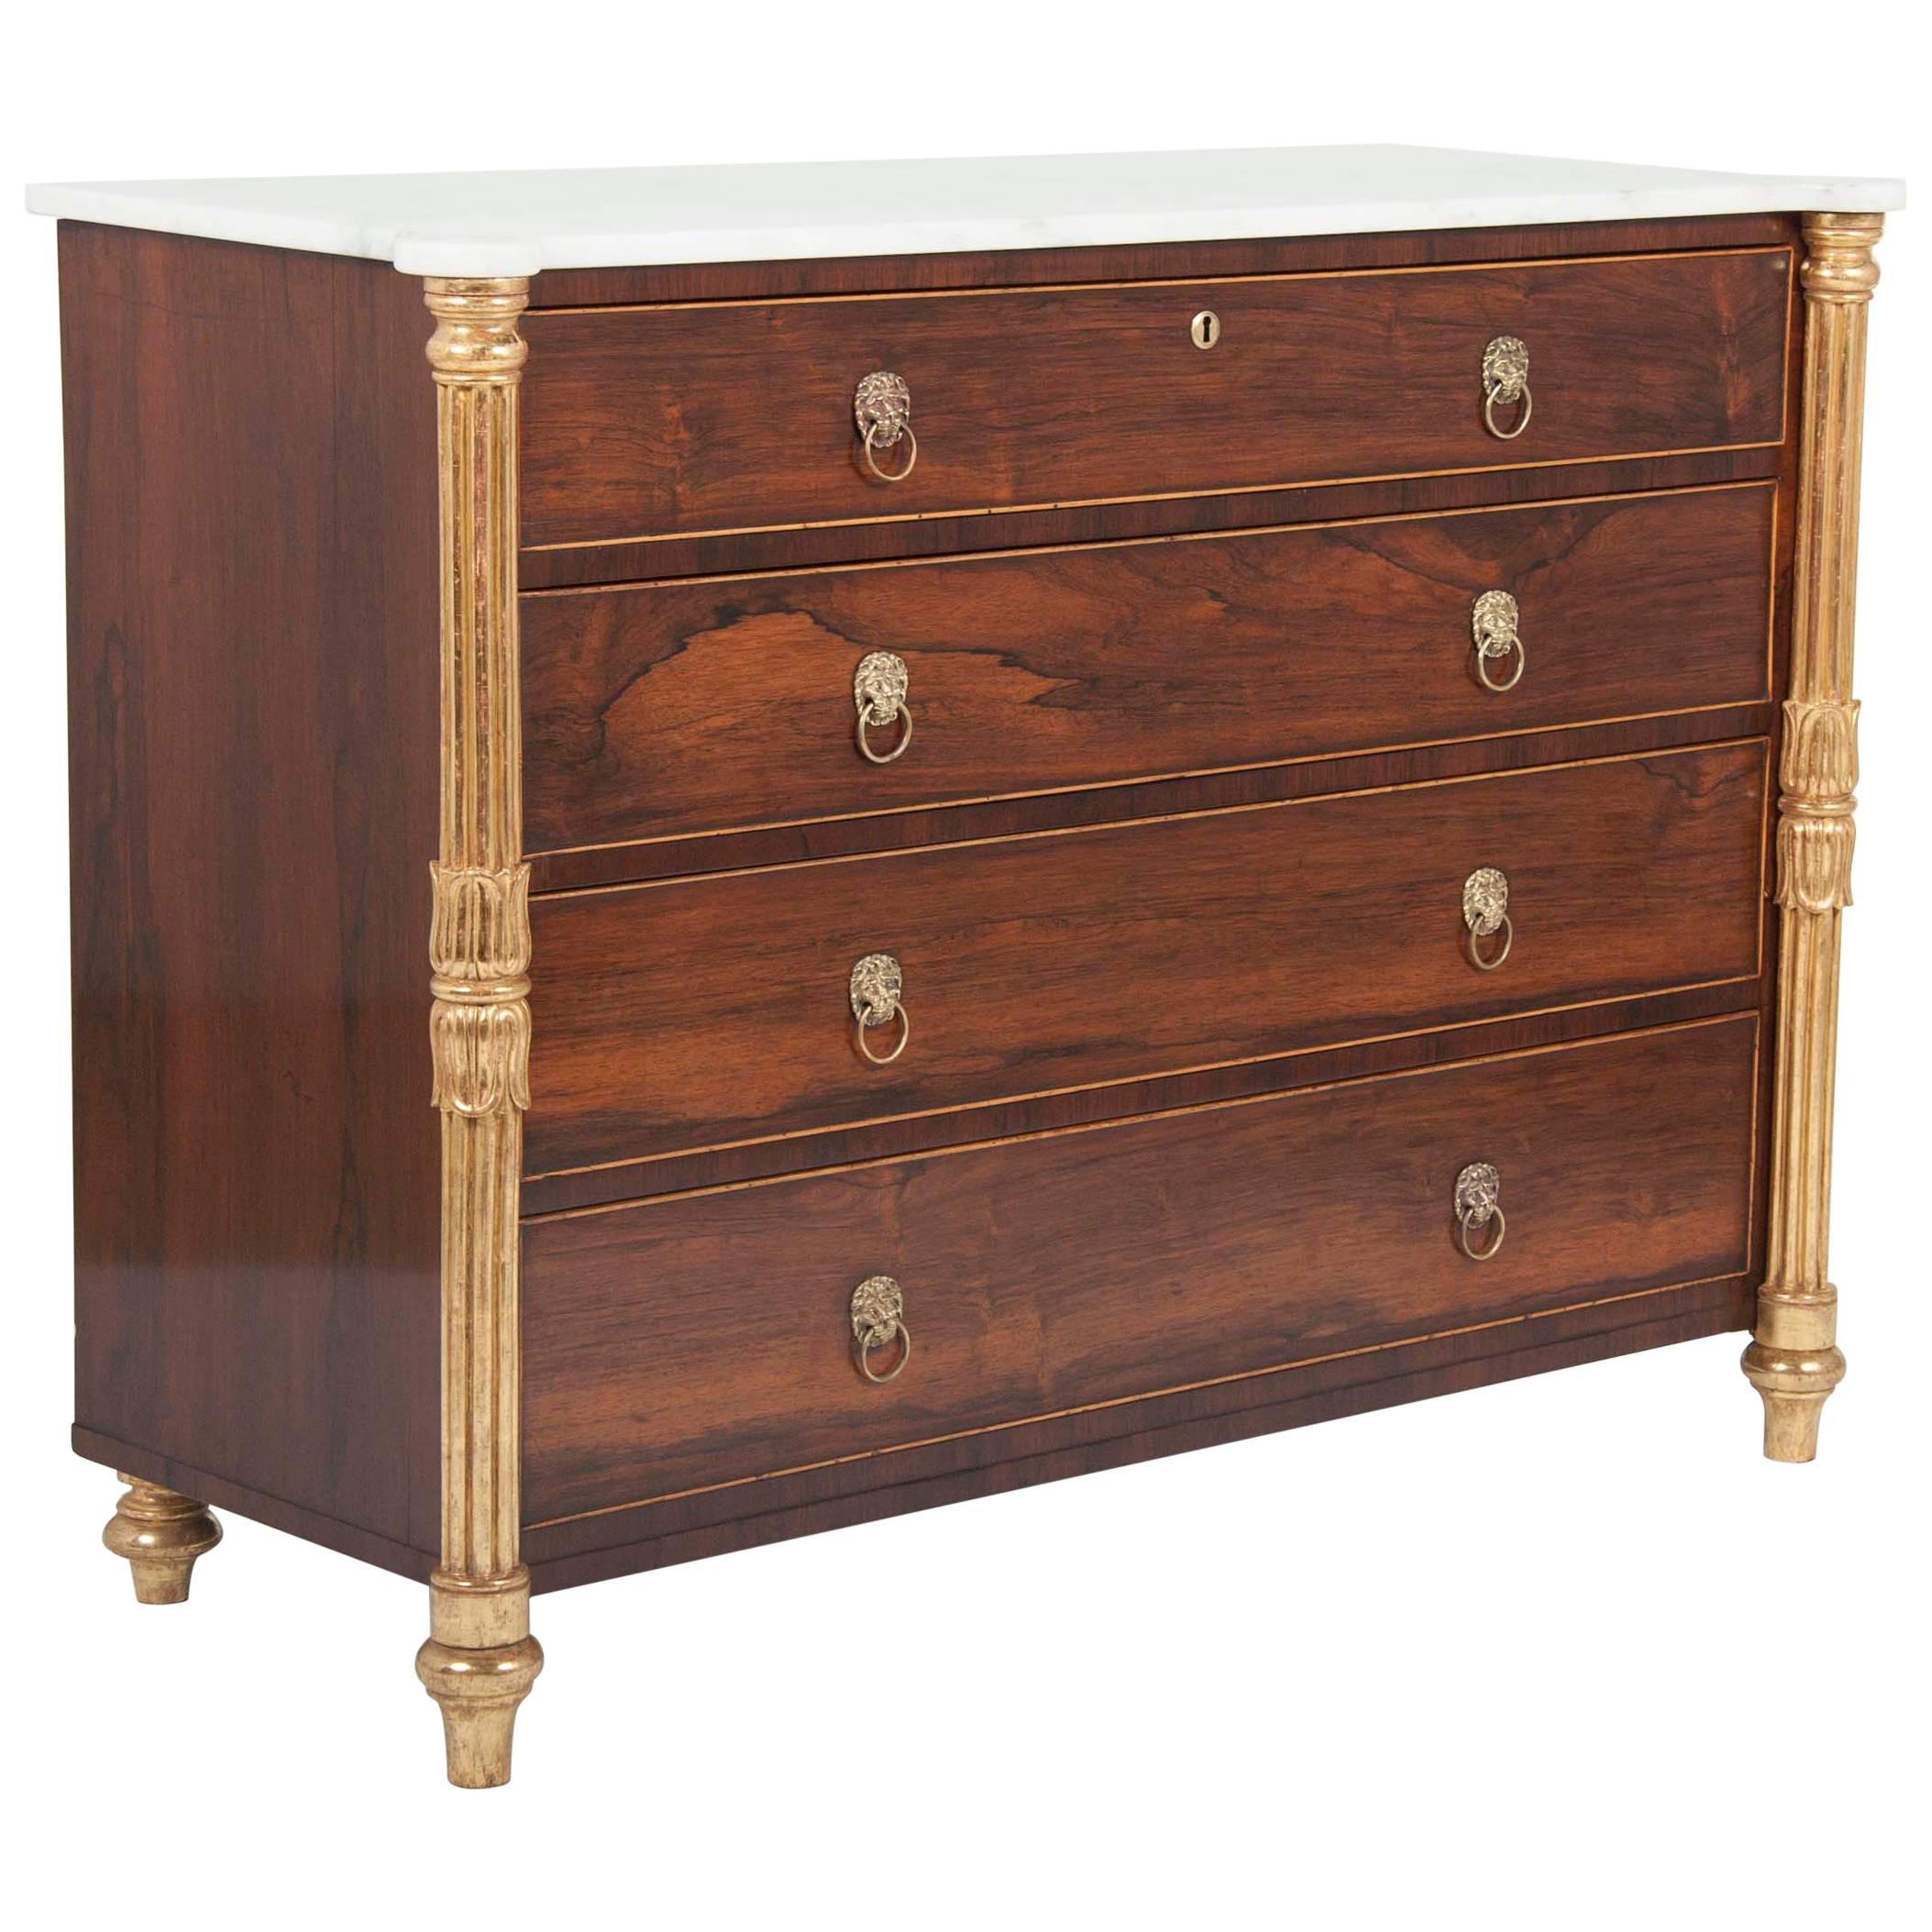 Unusual George IV Parcel-Gilt Rosewood Chest of Drawers